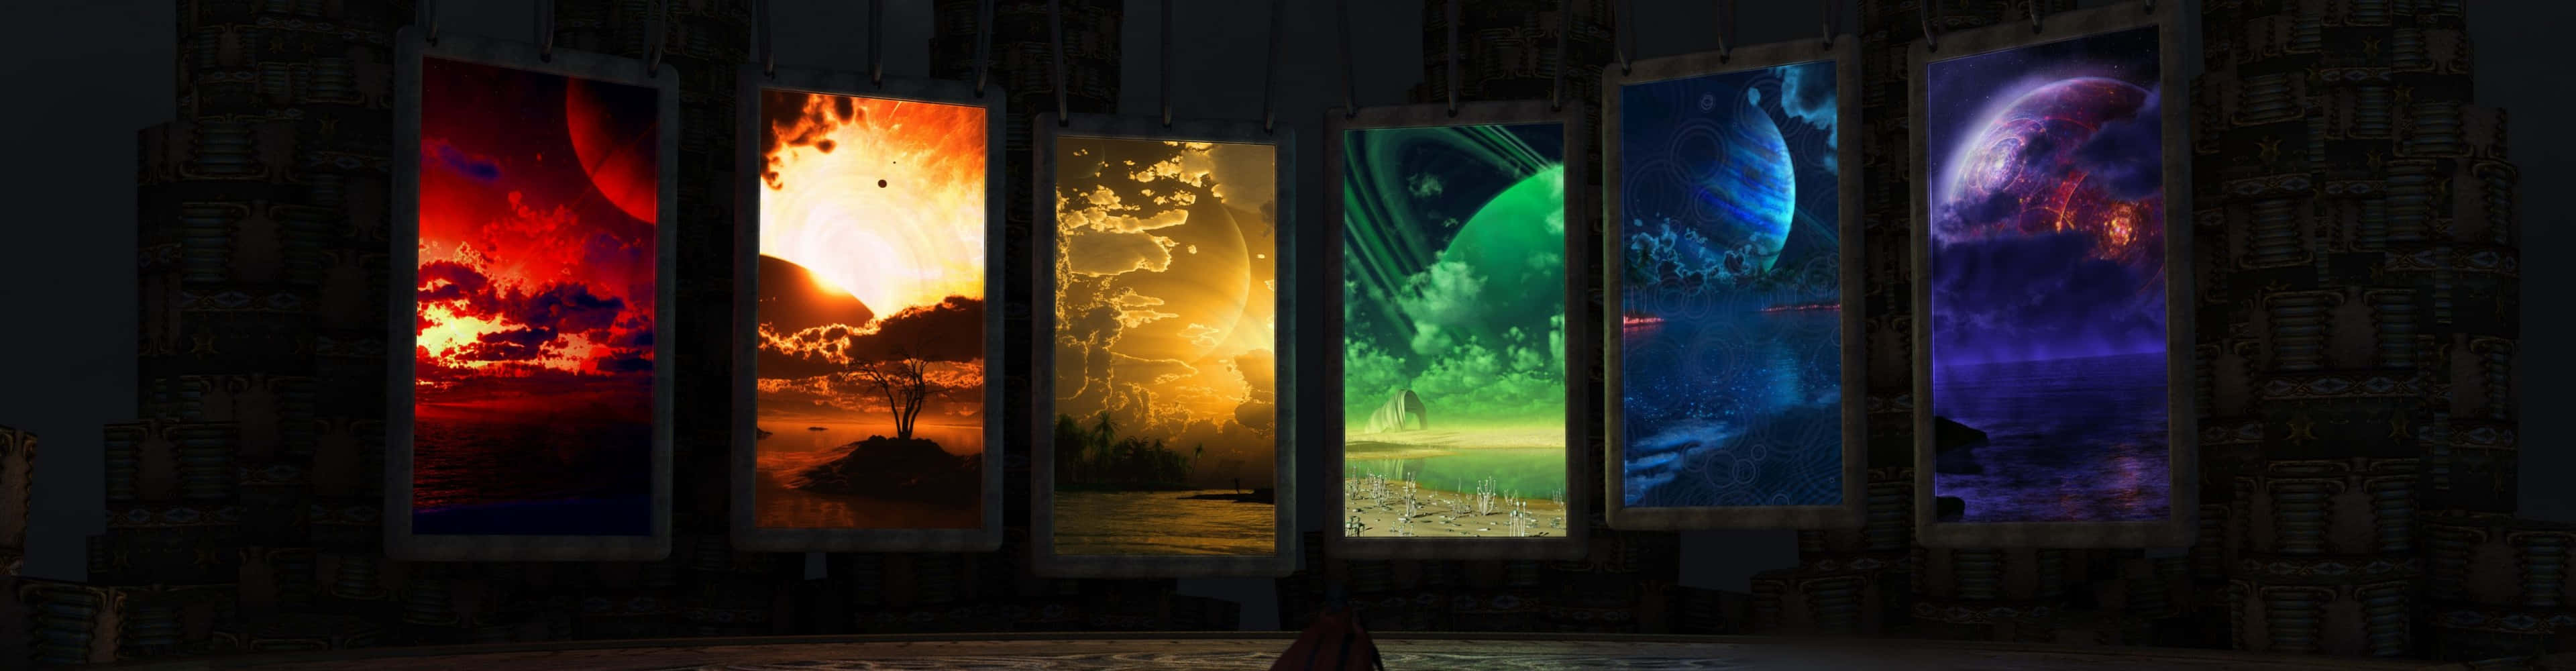 A Large Group Of Colorful Images Hanging In A Dark Room Wallpaper